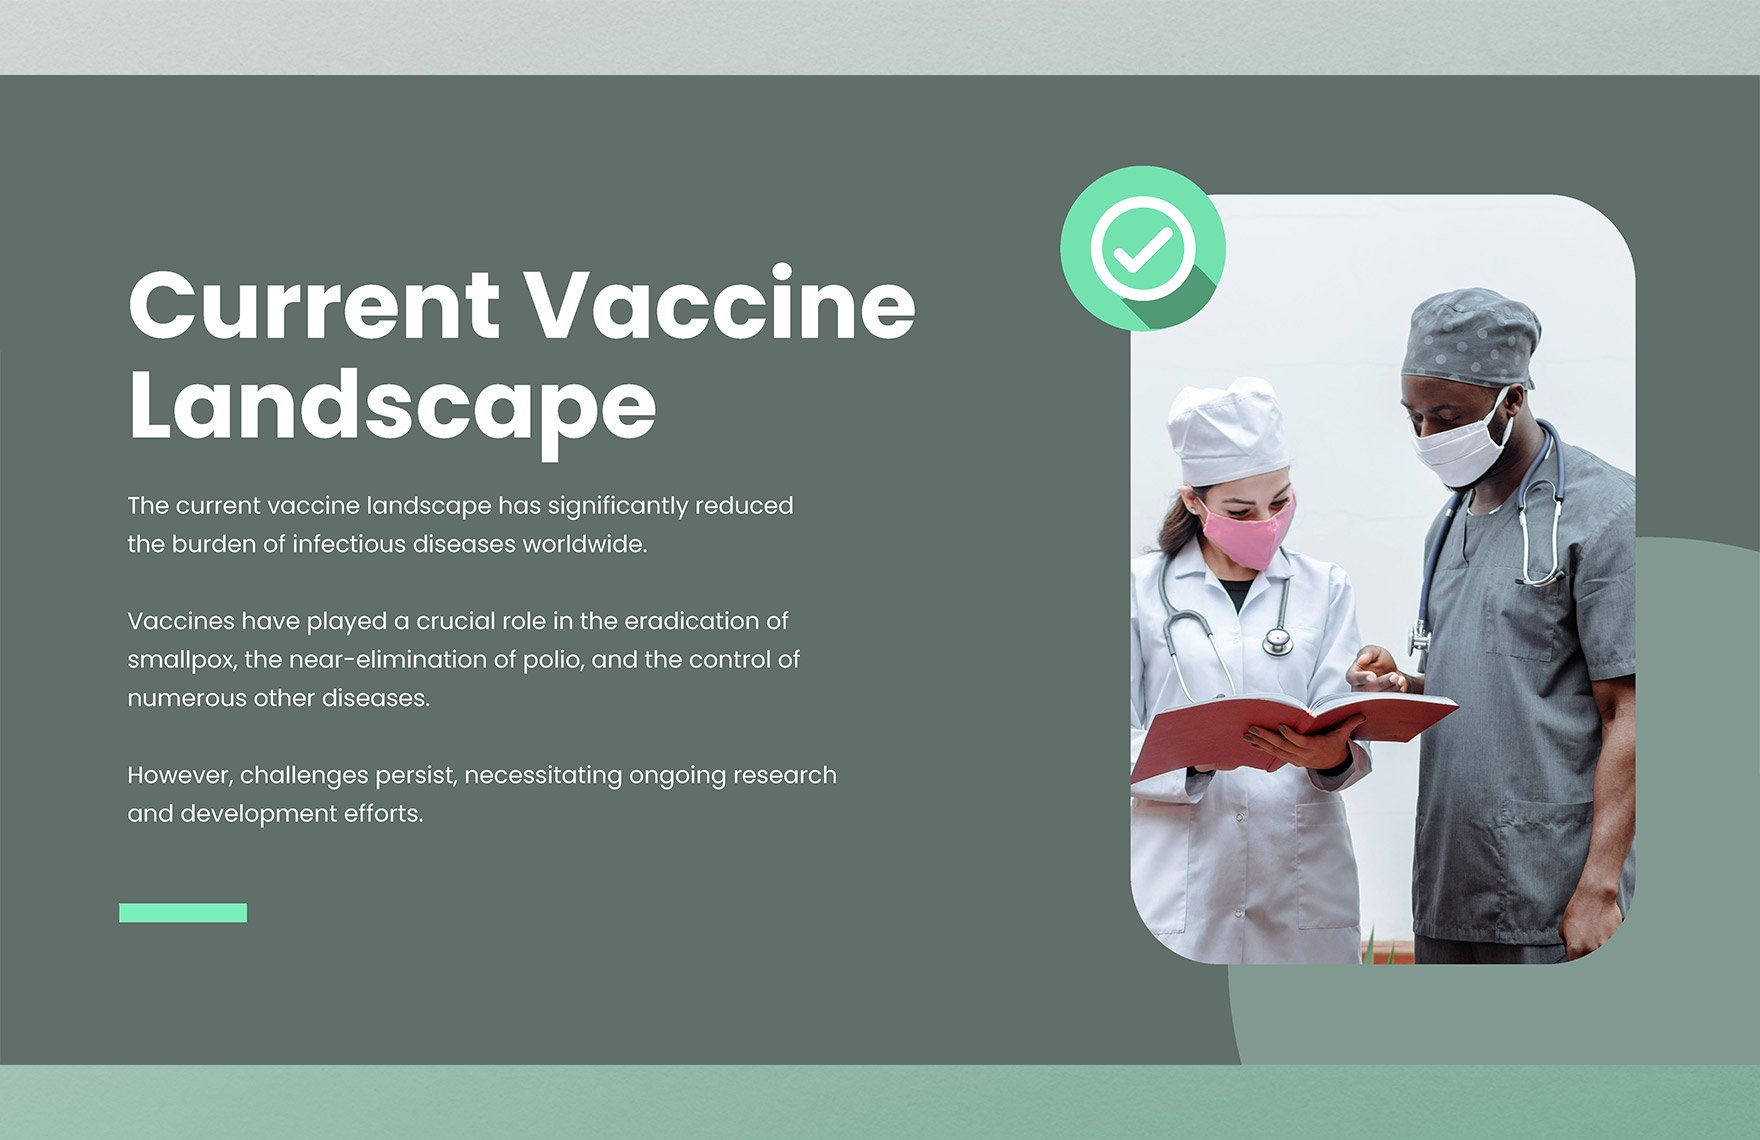 Medical Research Template